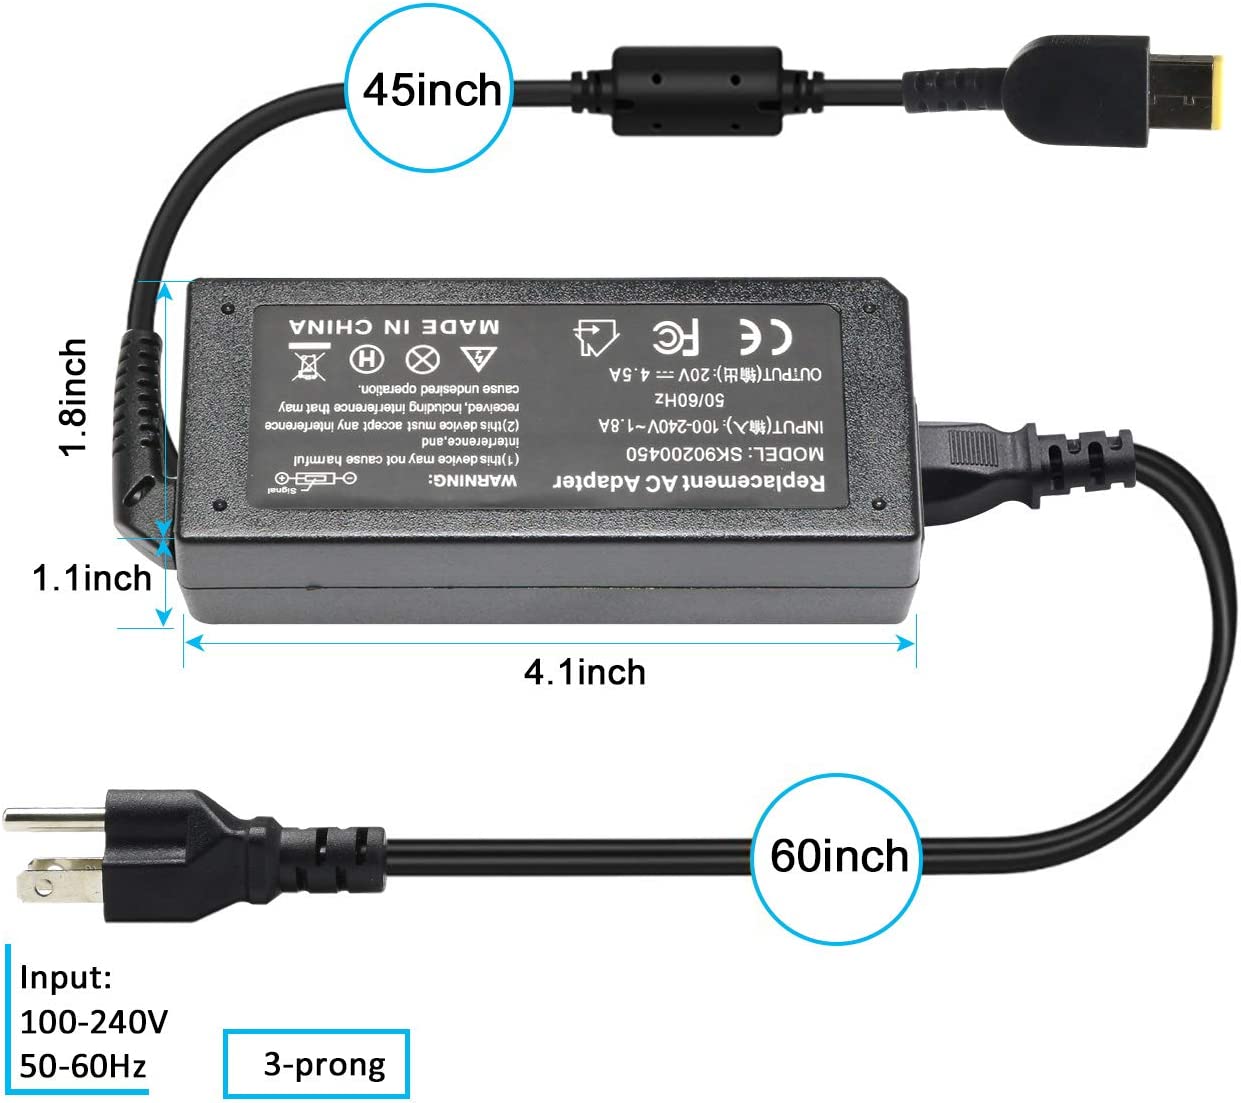 90W USB Laptop Adapter Charger for Lenovo Thinkpad X1 Carbon T440 T440S  T440p T540p T450s T550 L440 L450 L460 L470 X250